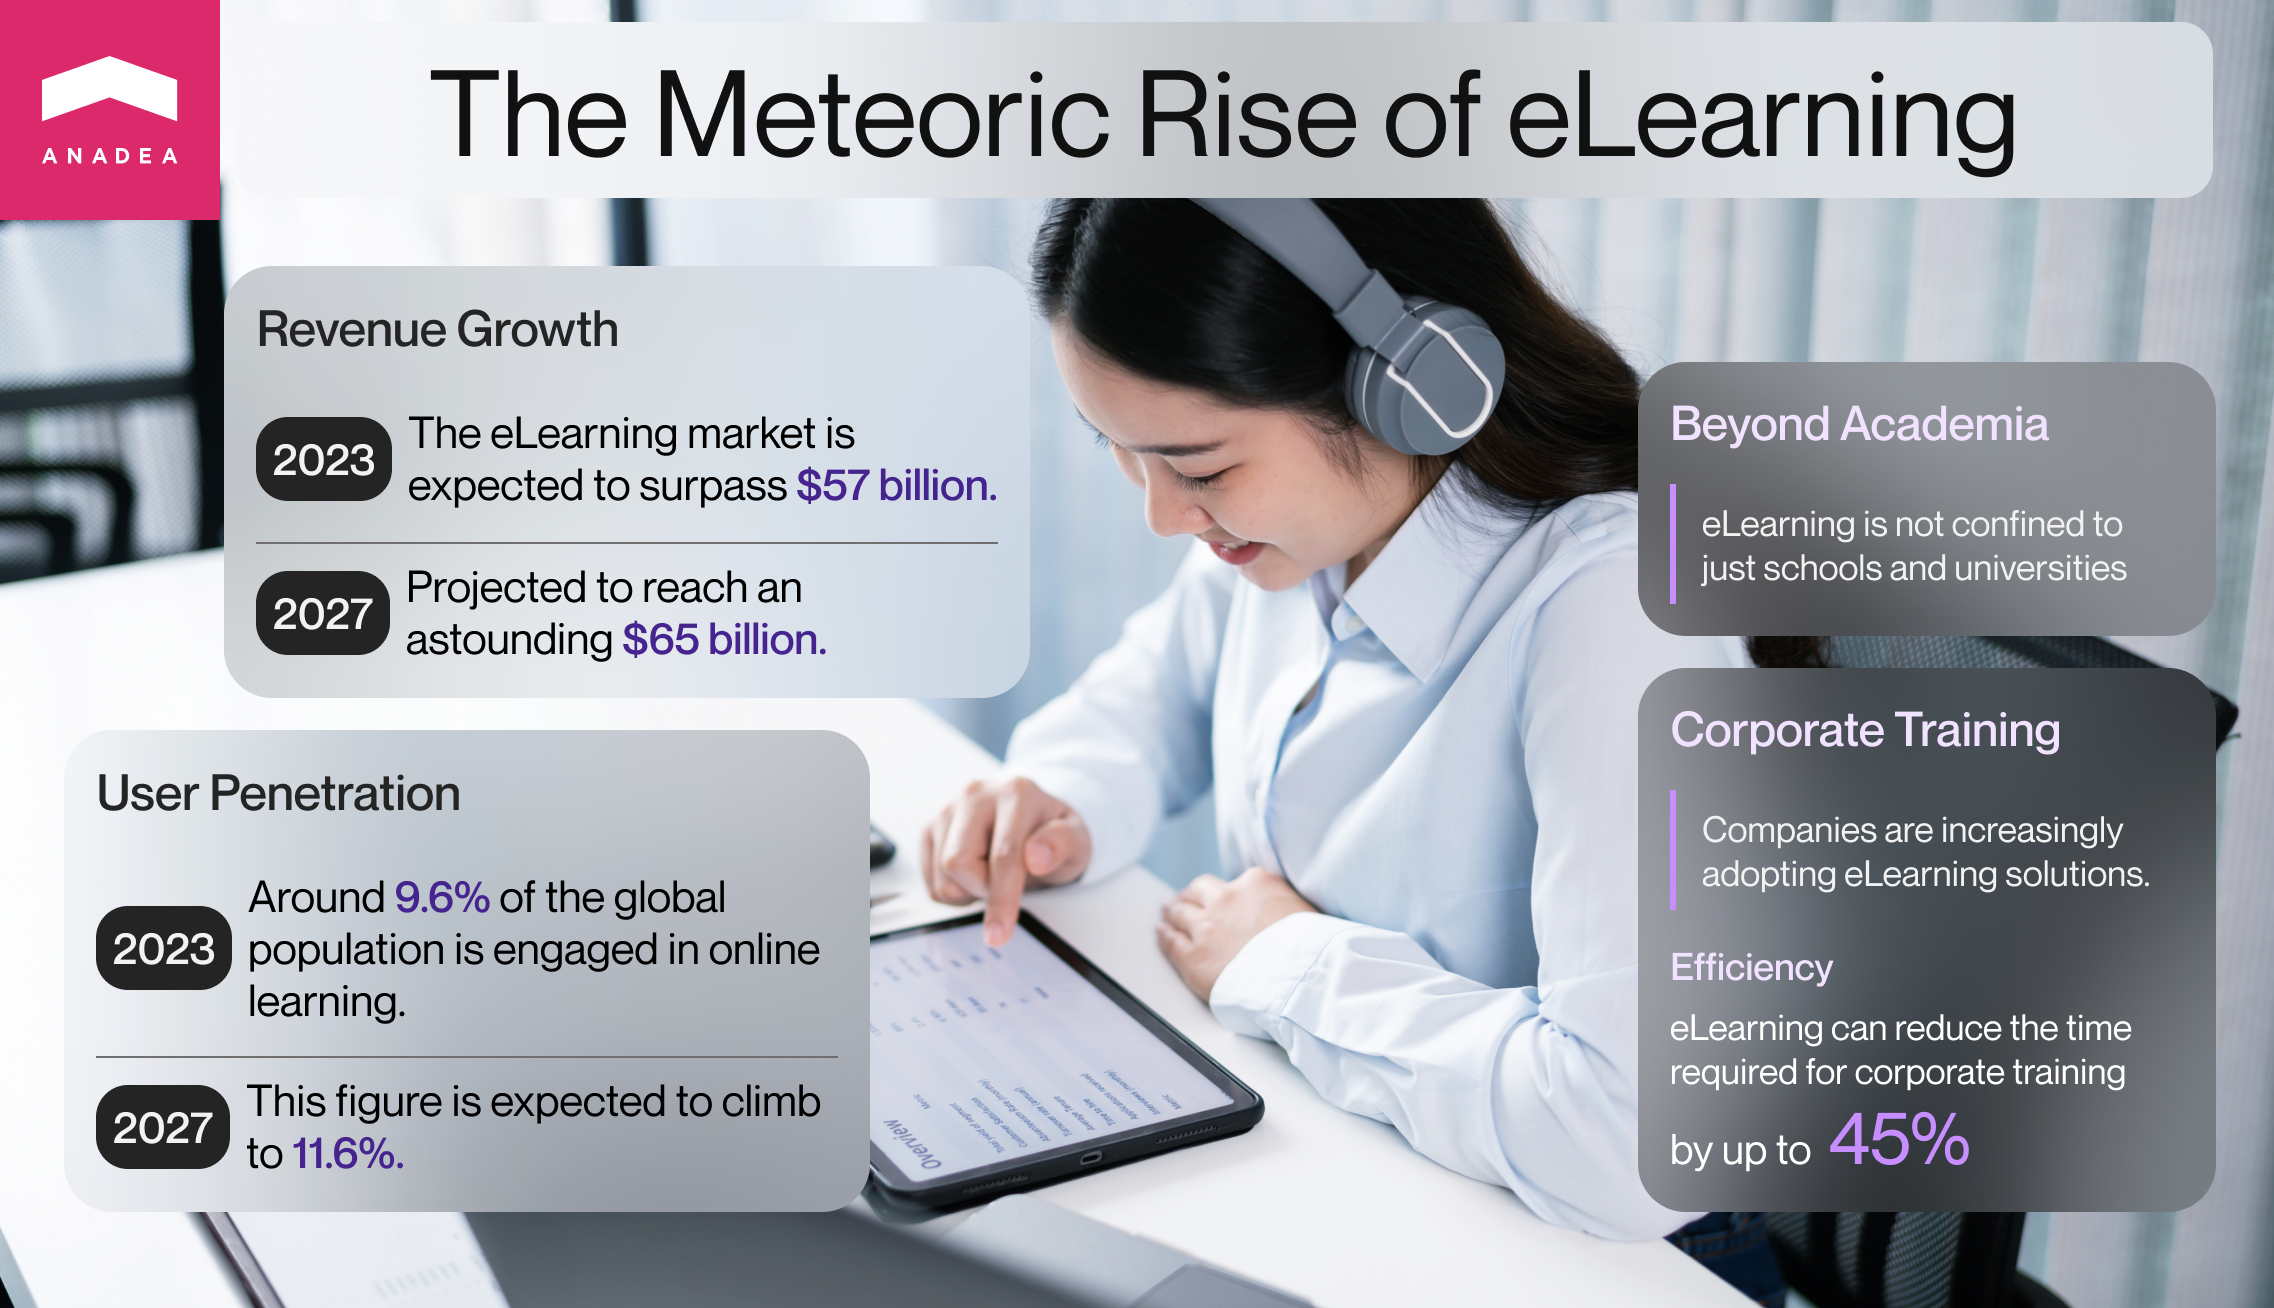 eLearning revenue growth and market penetration